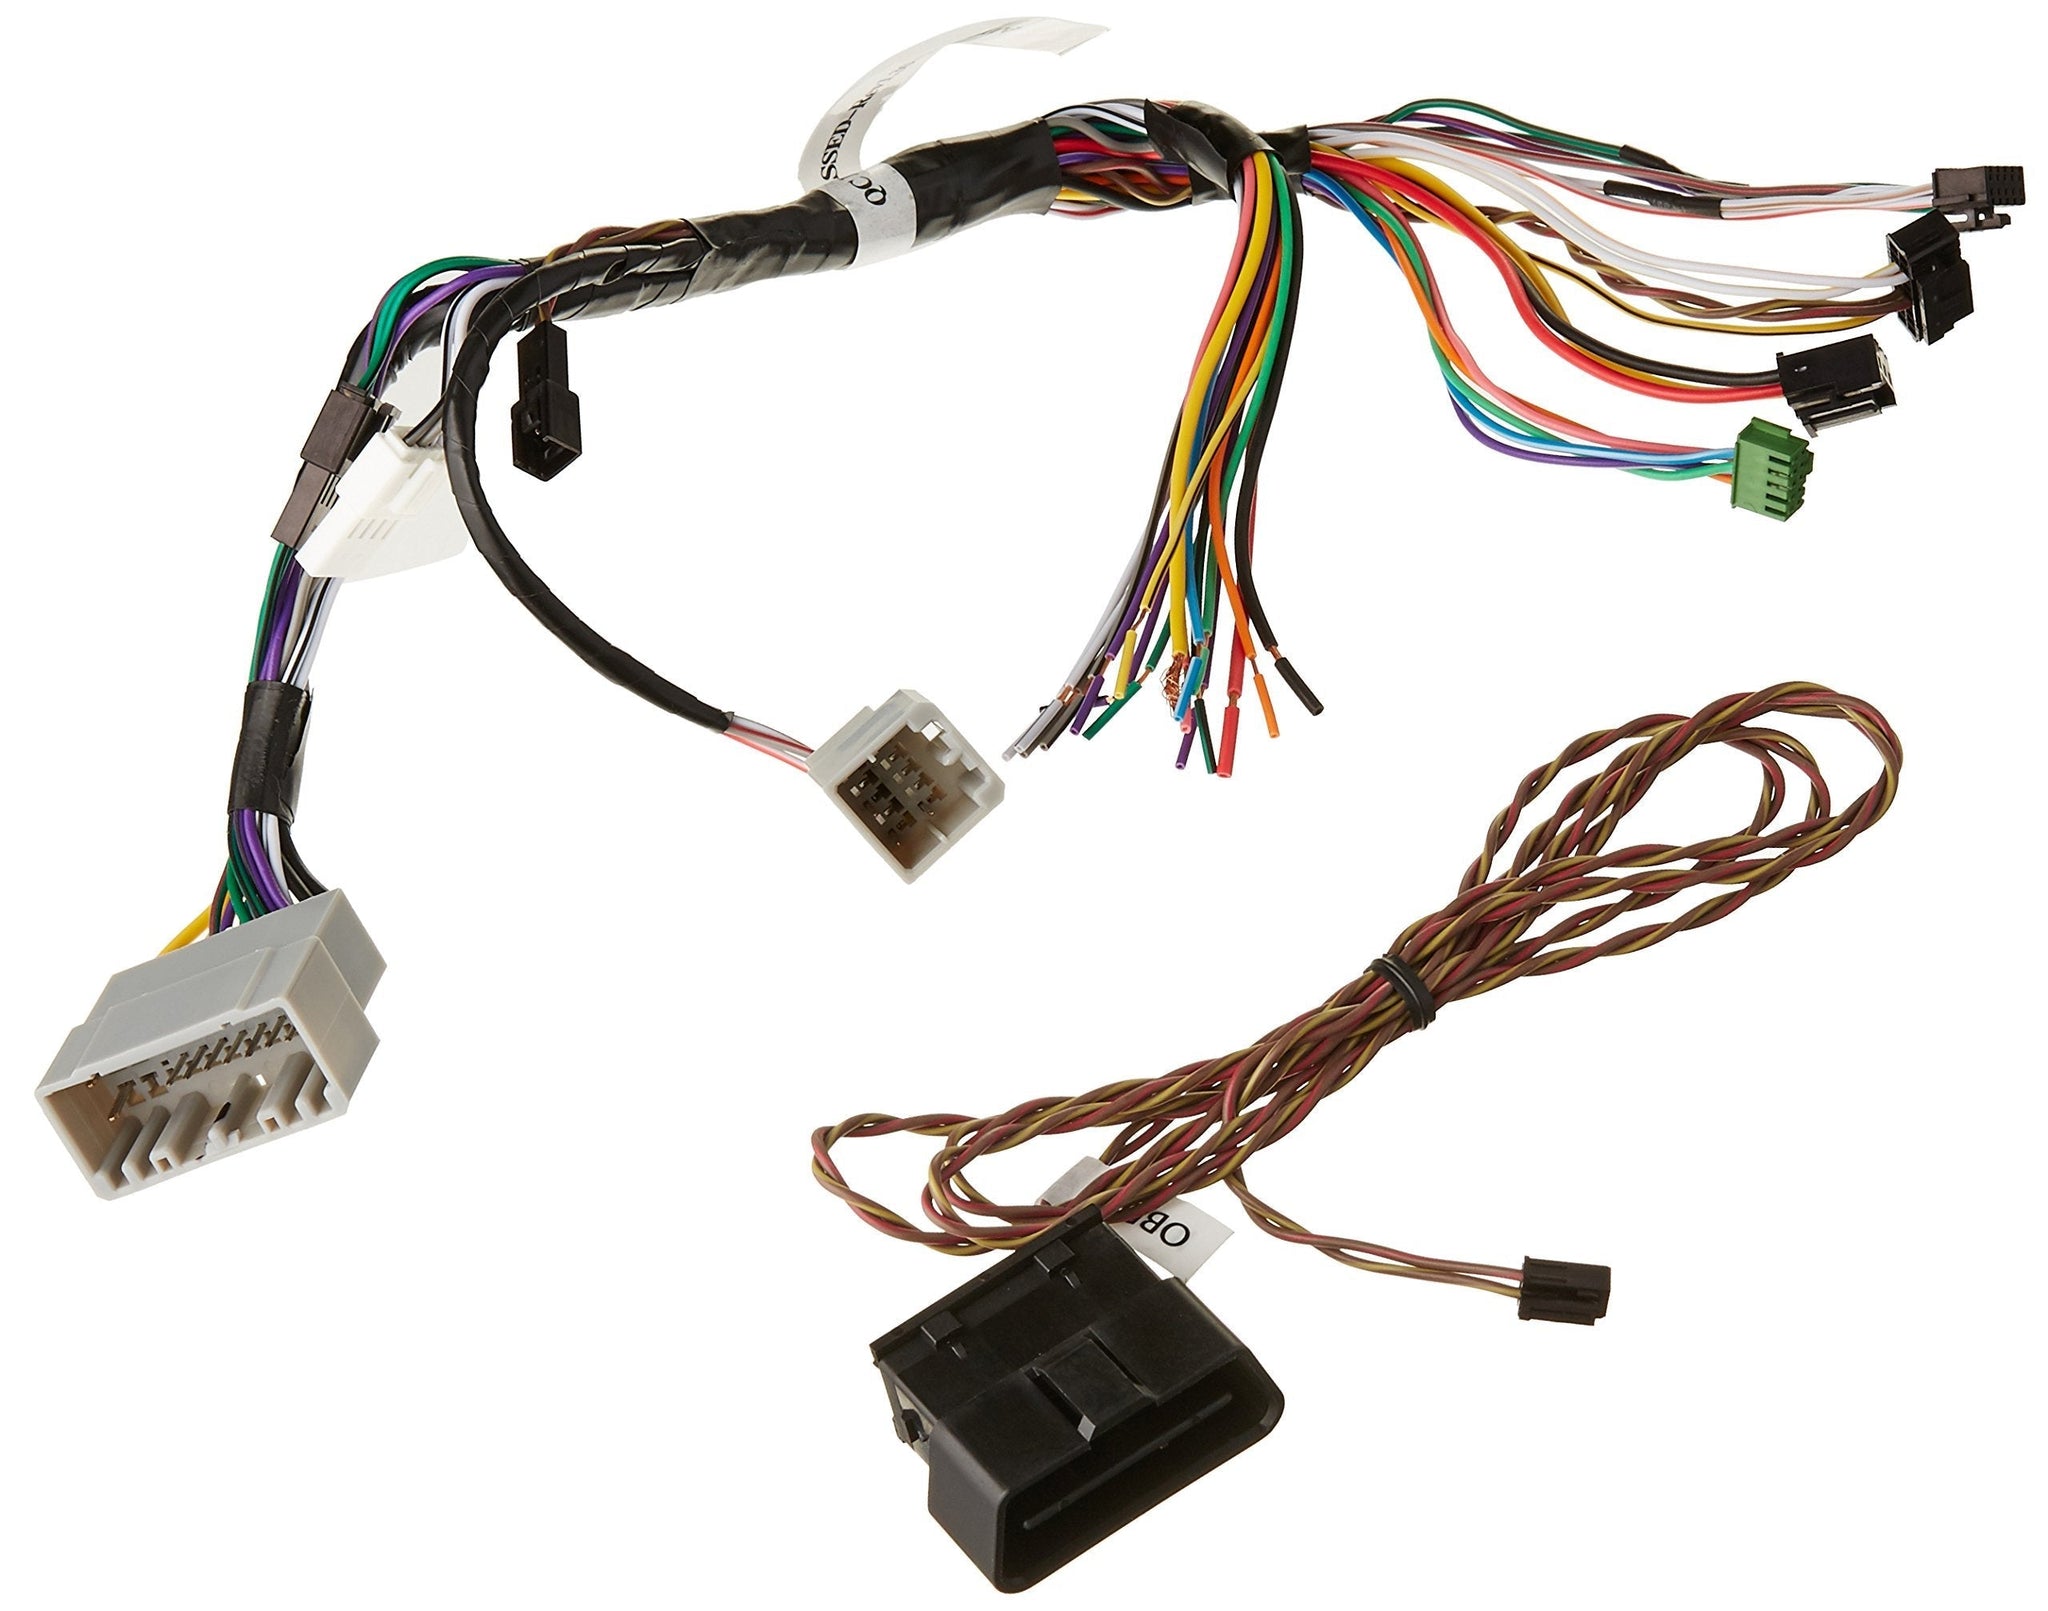 iDatalink HRN-RR-CH2 Interface Harness Connect a new car stereo and retain steering wheel audio controls and factory amp in select 2004-10 Chrysler-made vehicles ( ADS-MRR or ADS-MRR2 module also required )